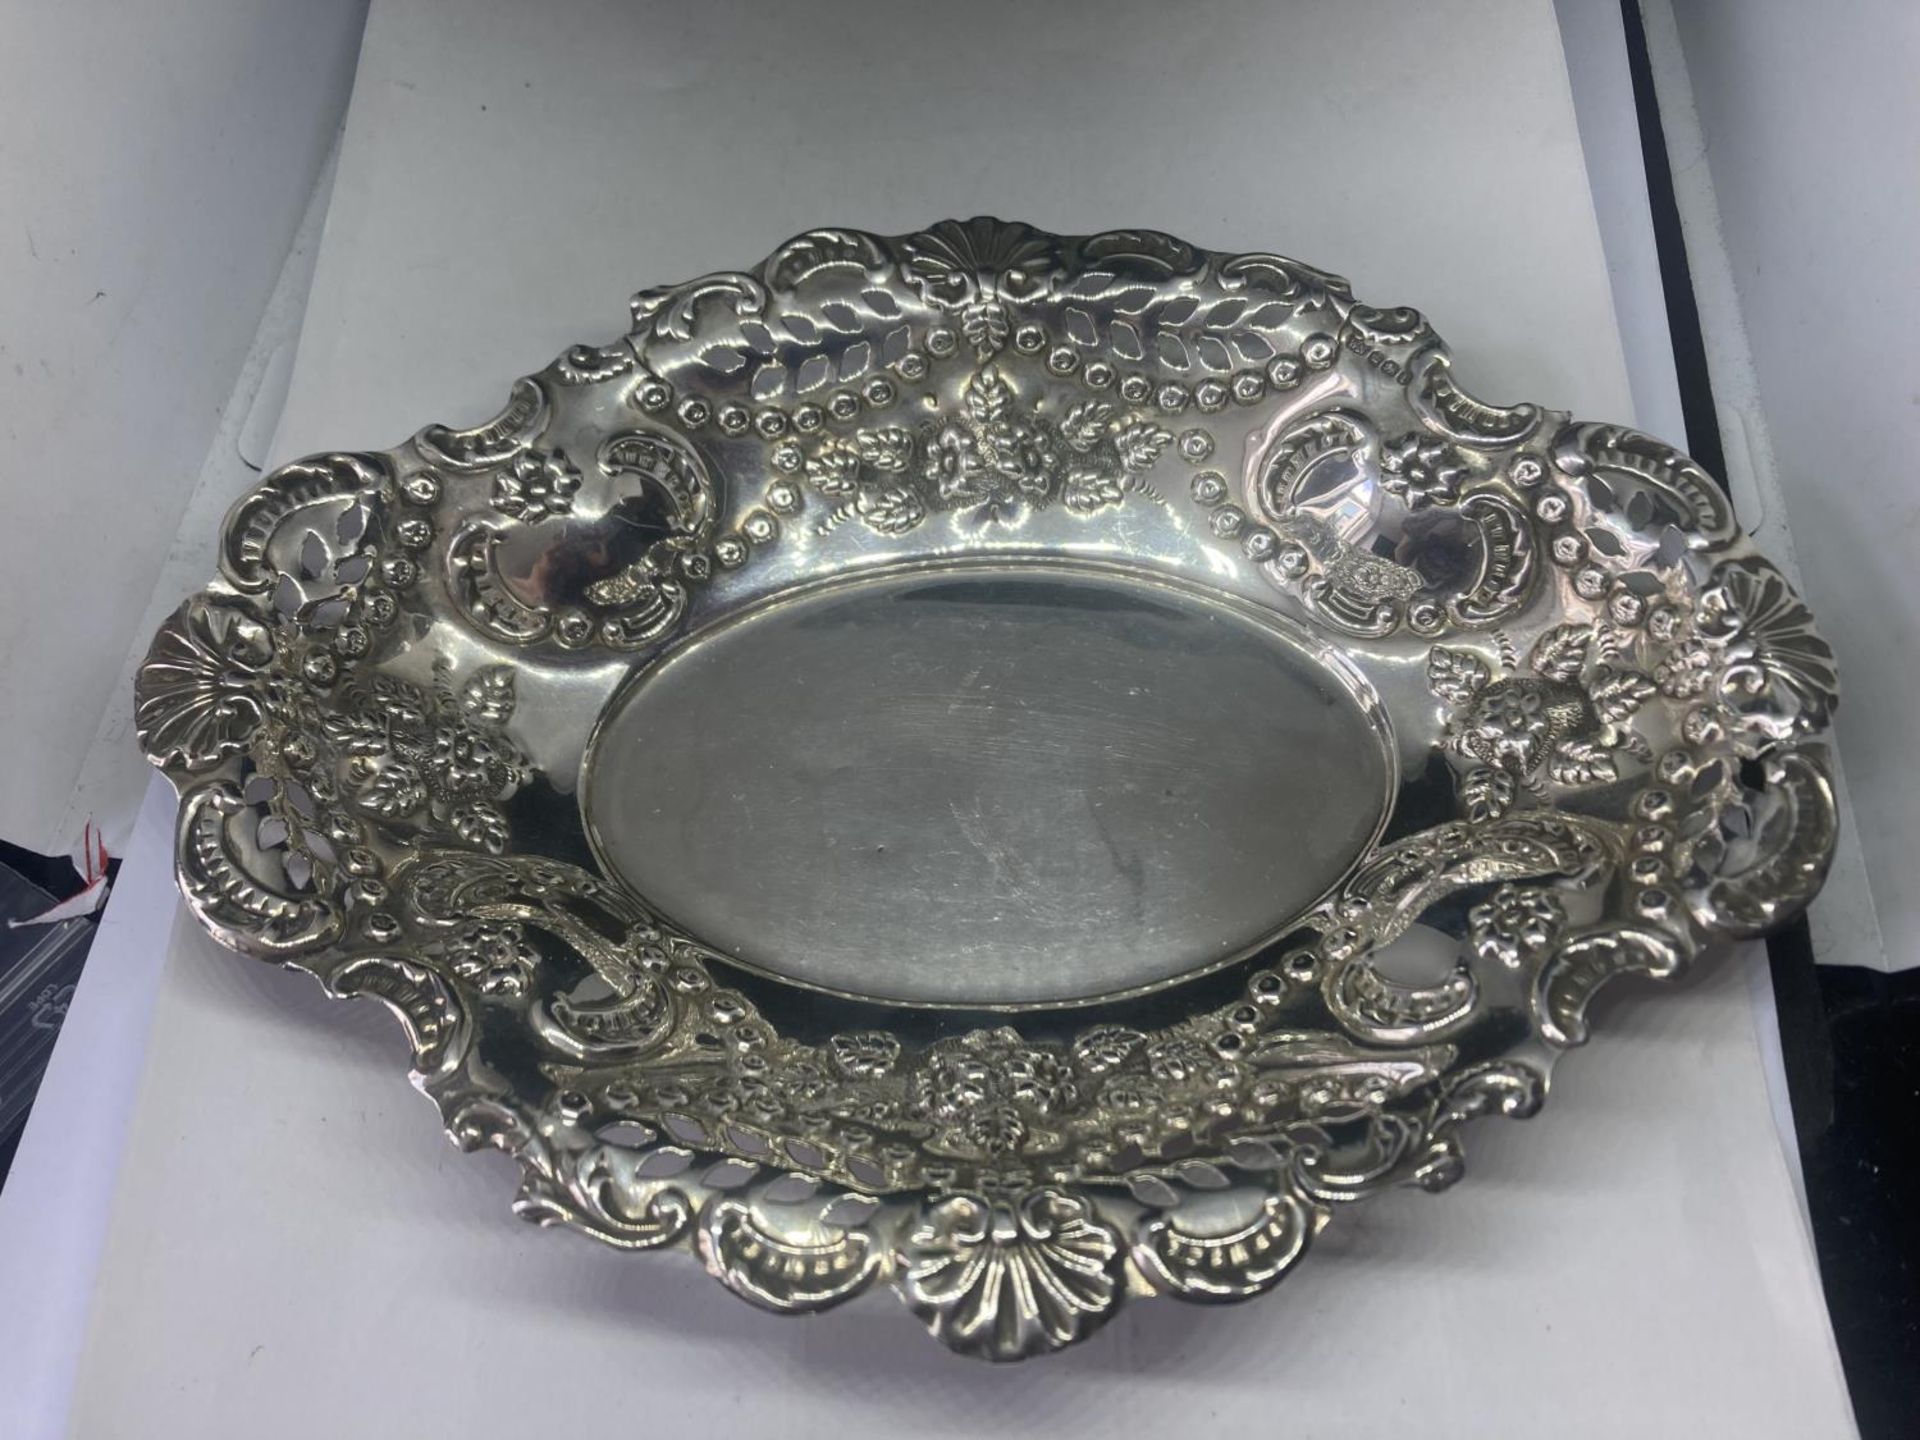 A DECORATIVE HALLMARKED SHEFFIELD SILVER DISH GROSS WEIGHT 124 GRAMS - Image 3 of 10